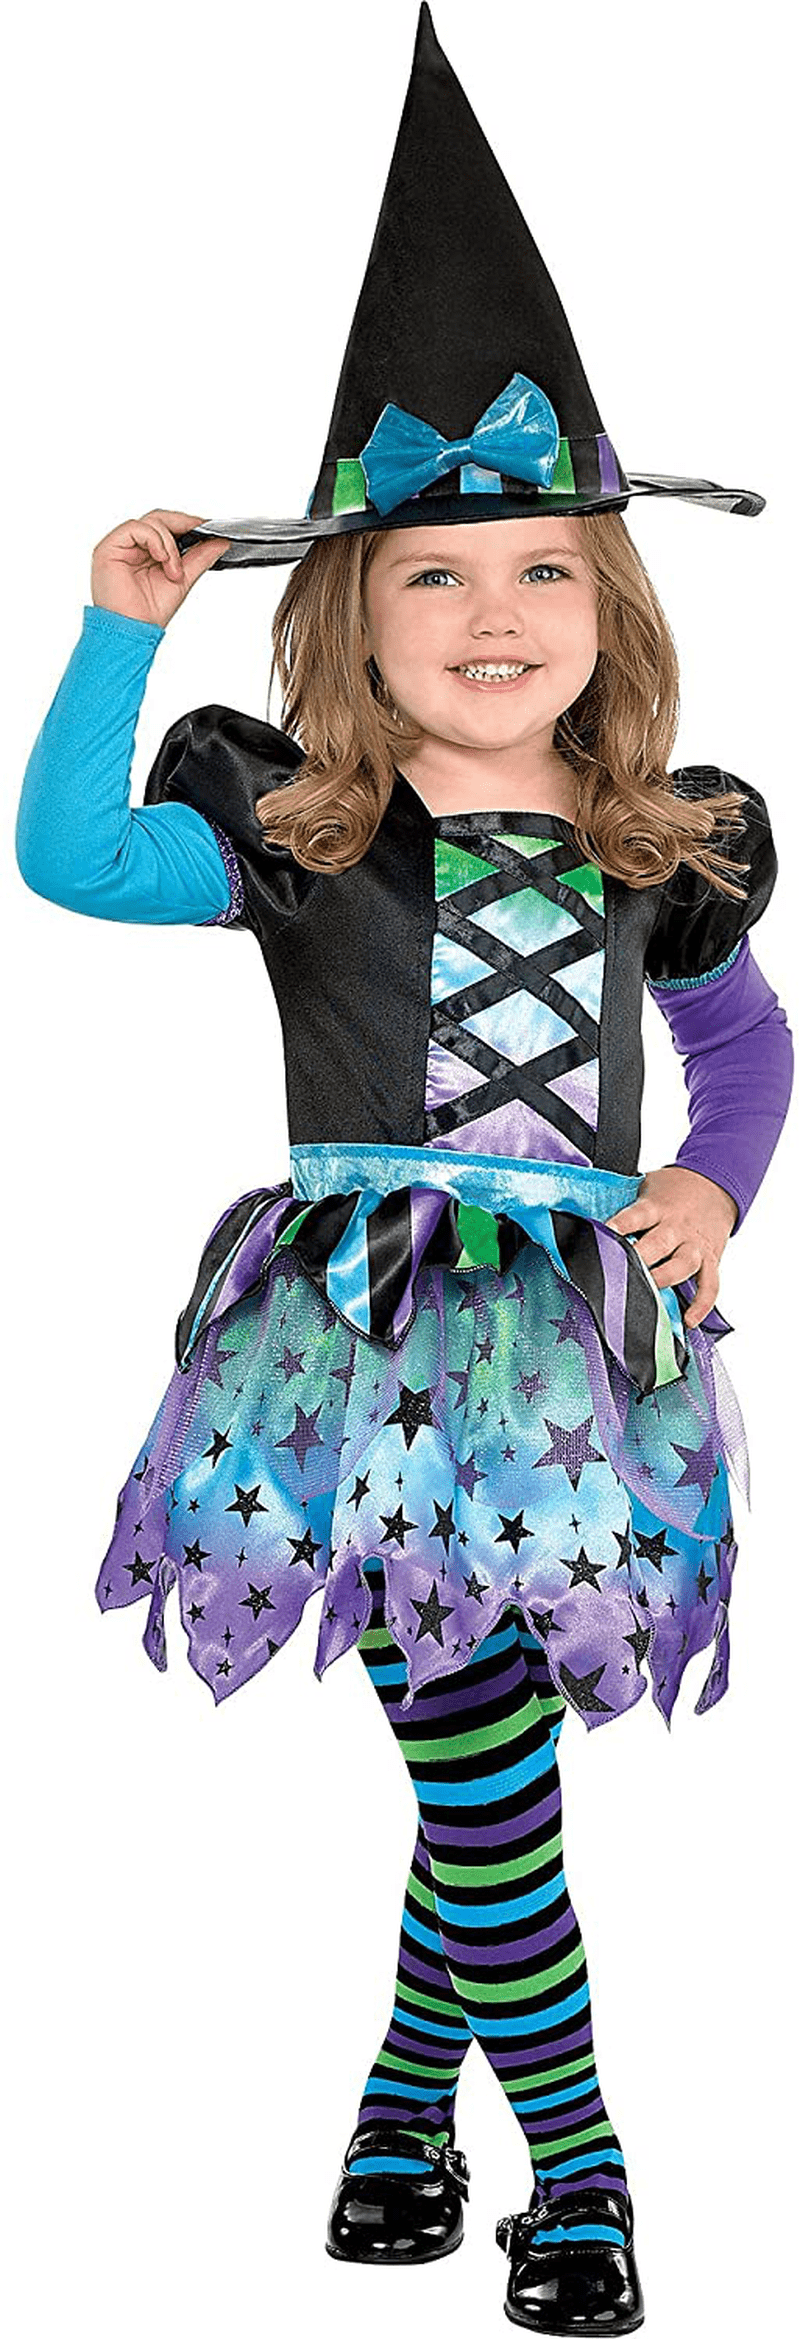 amscan Suit Yourself Spell Caster Witch Costume for Girls, Size 2T, Includes a Colorful Dress, a Hat, and Striped Tights